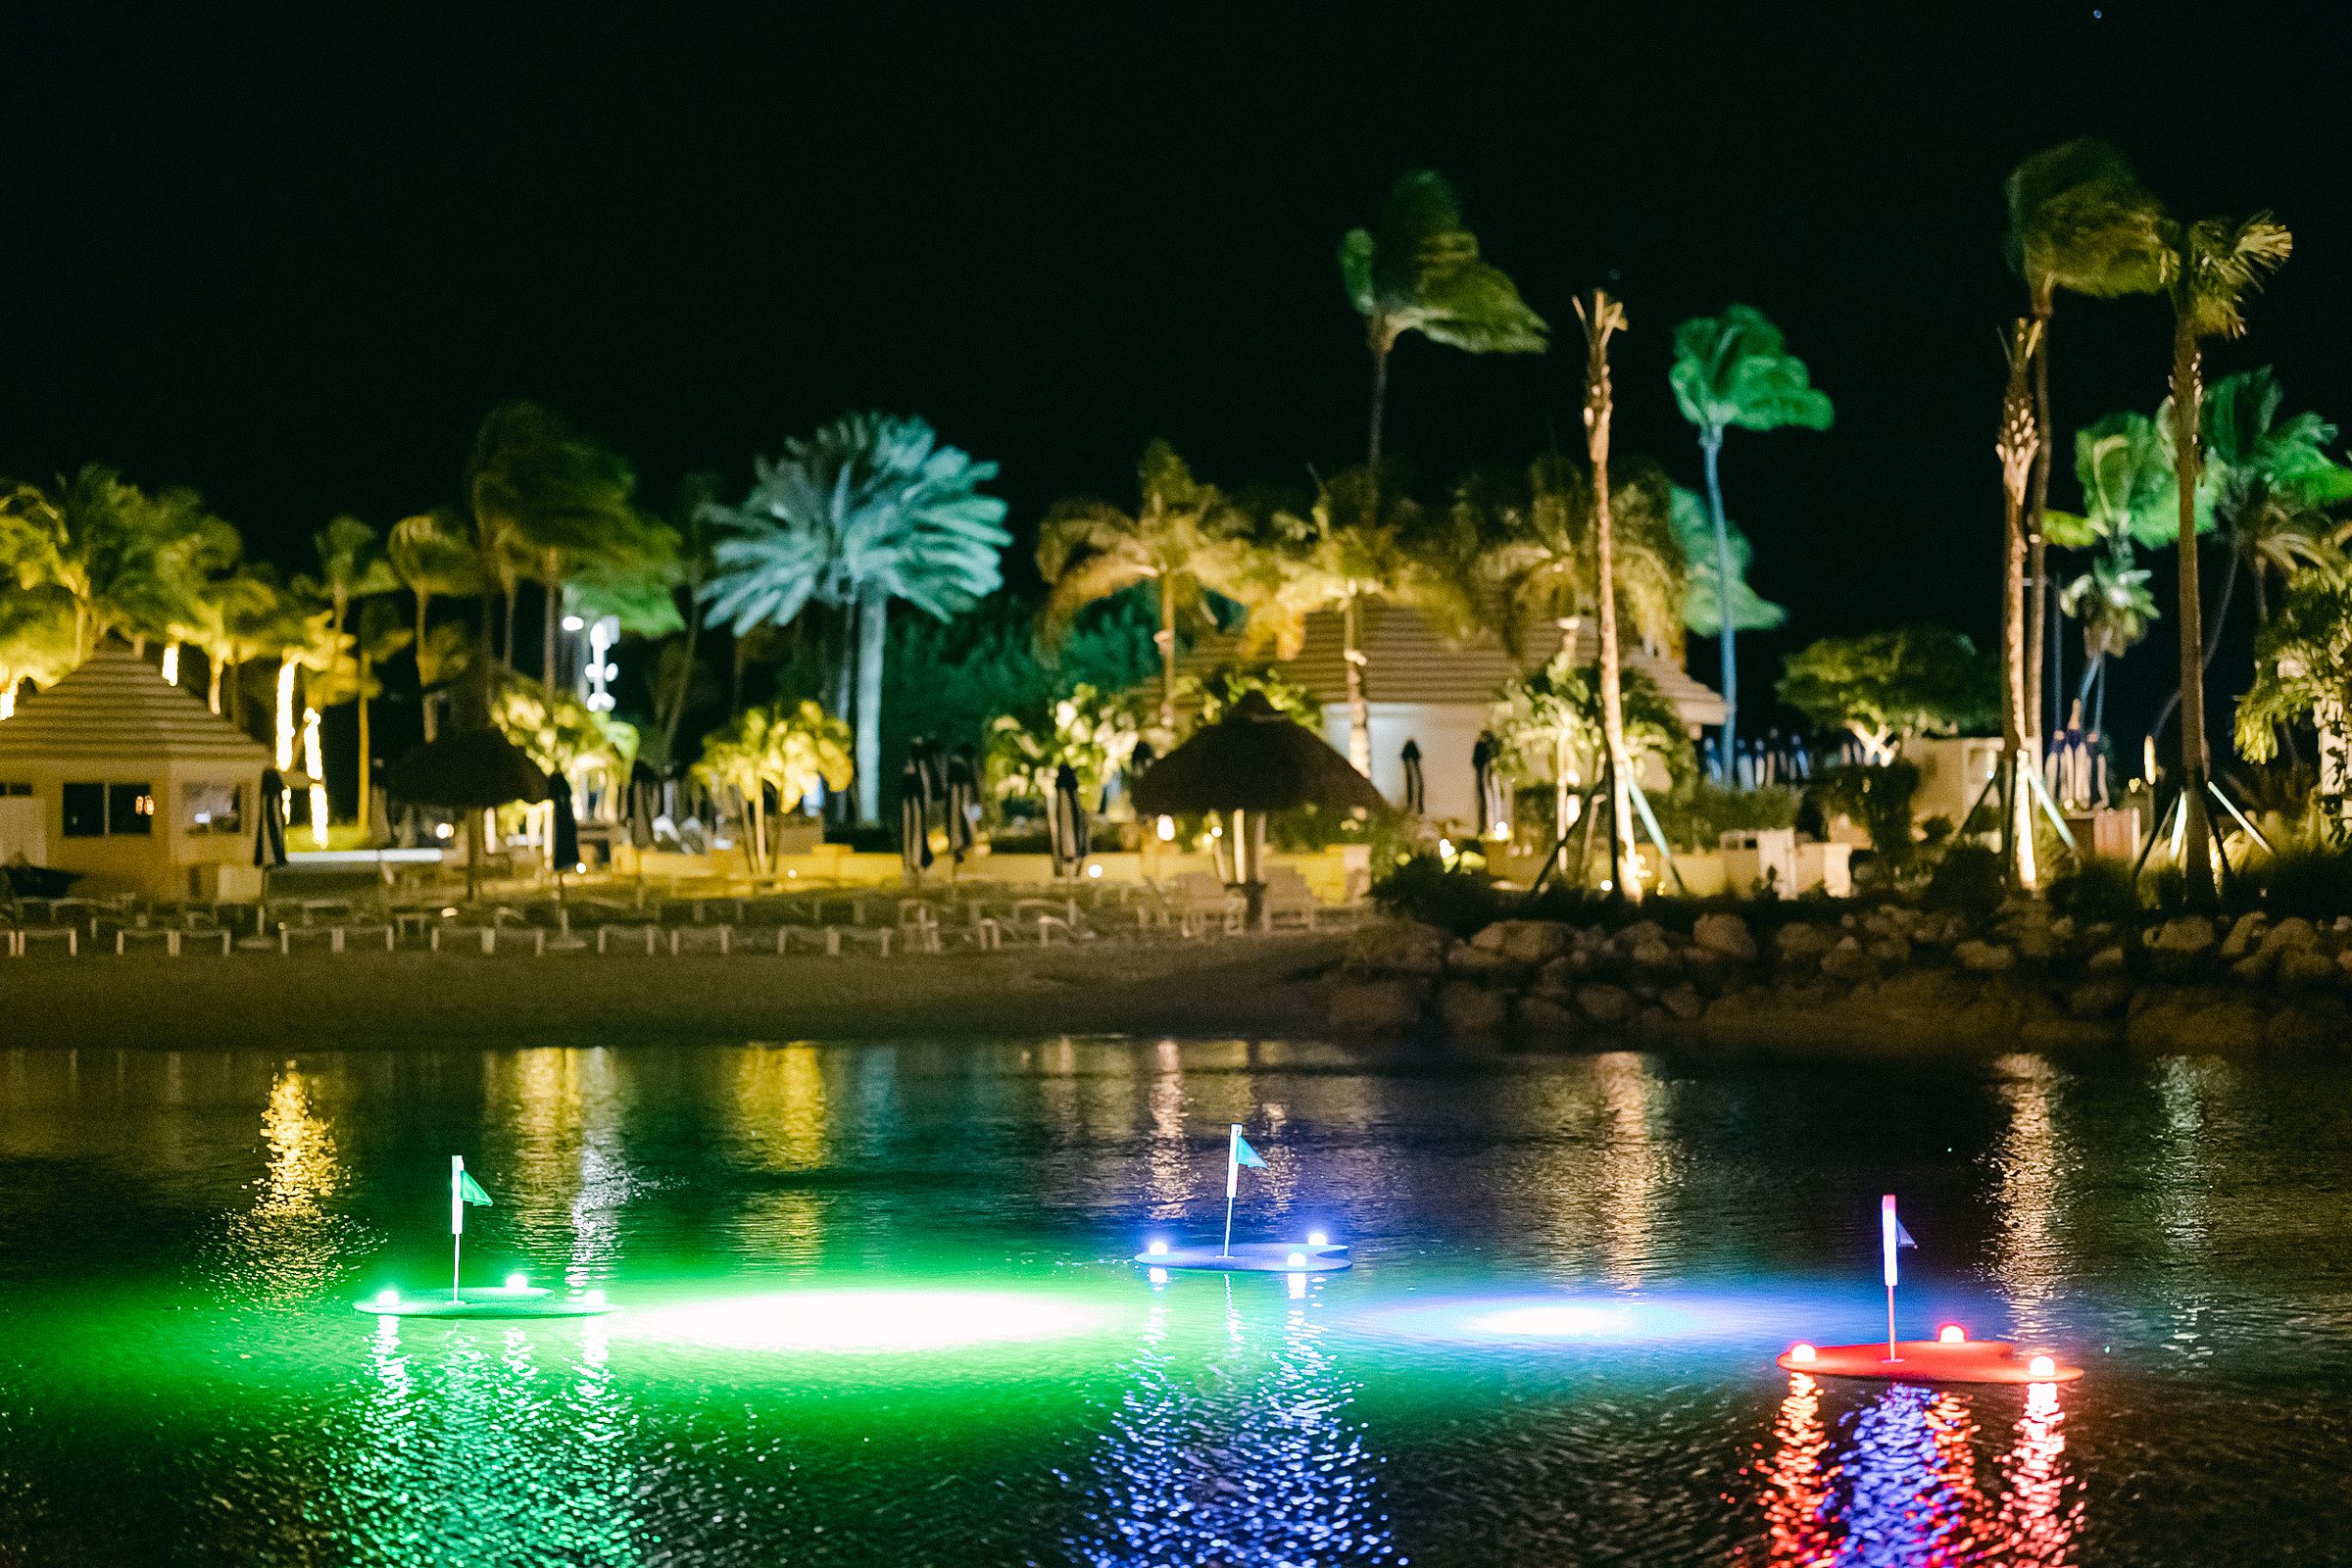 Glow in the dark golf at a welcome party at Ocean Reef Club